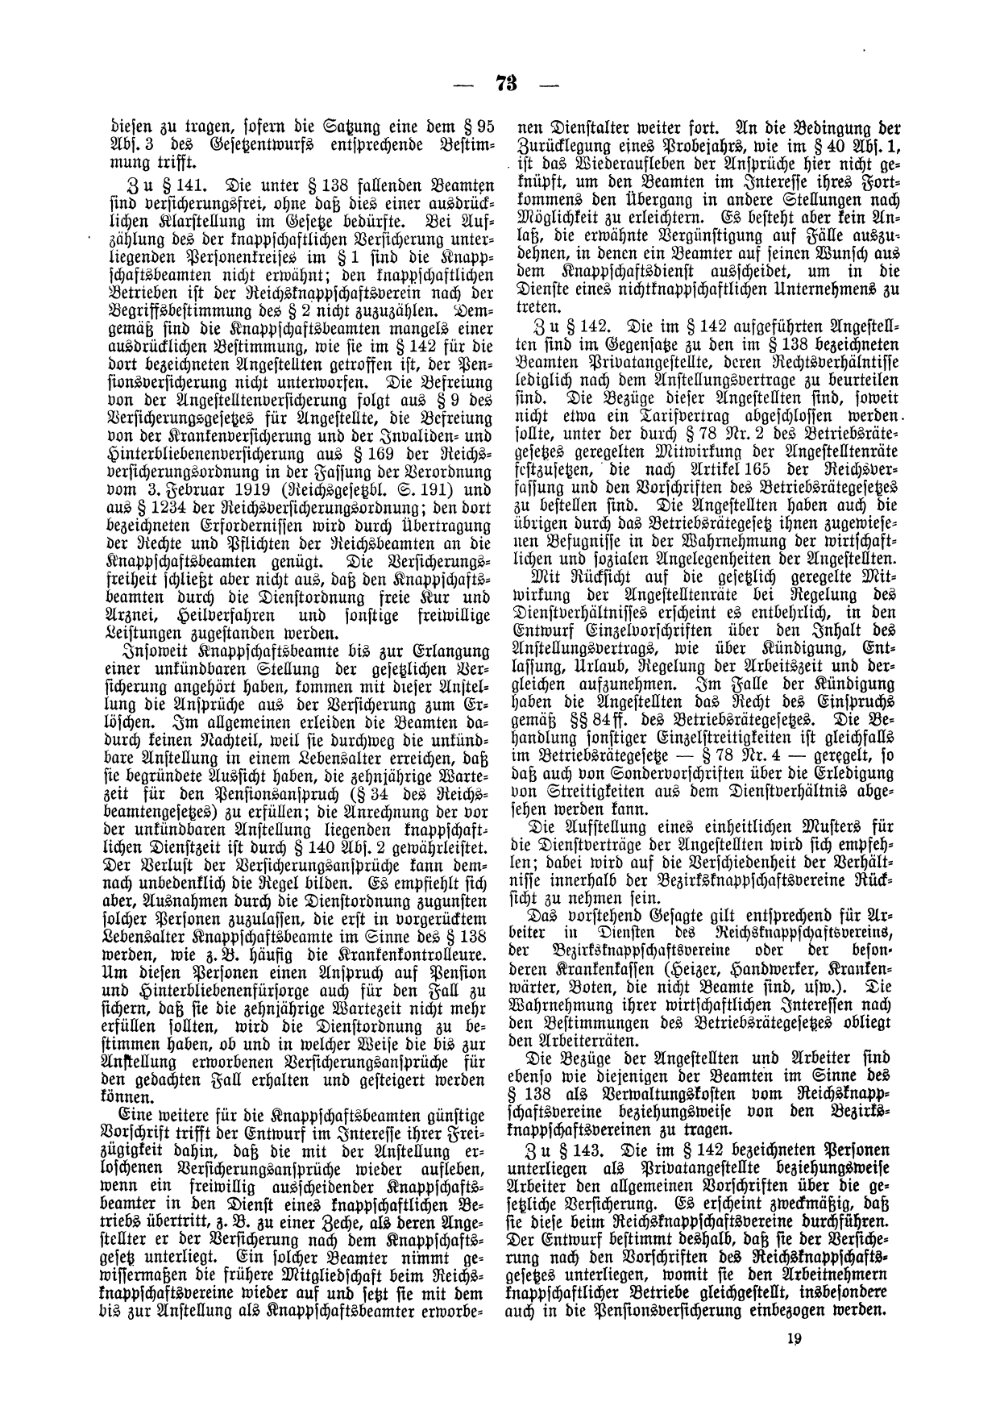 Scan of page 73